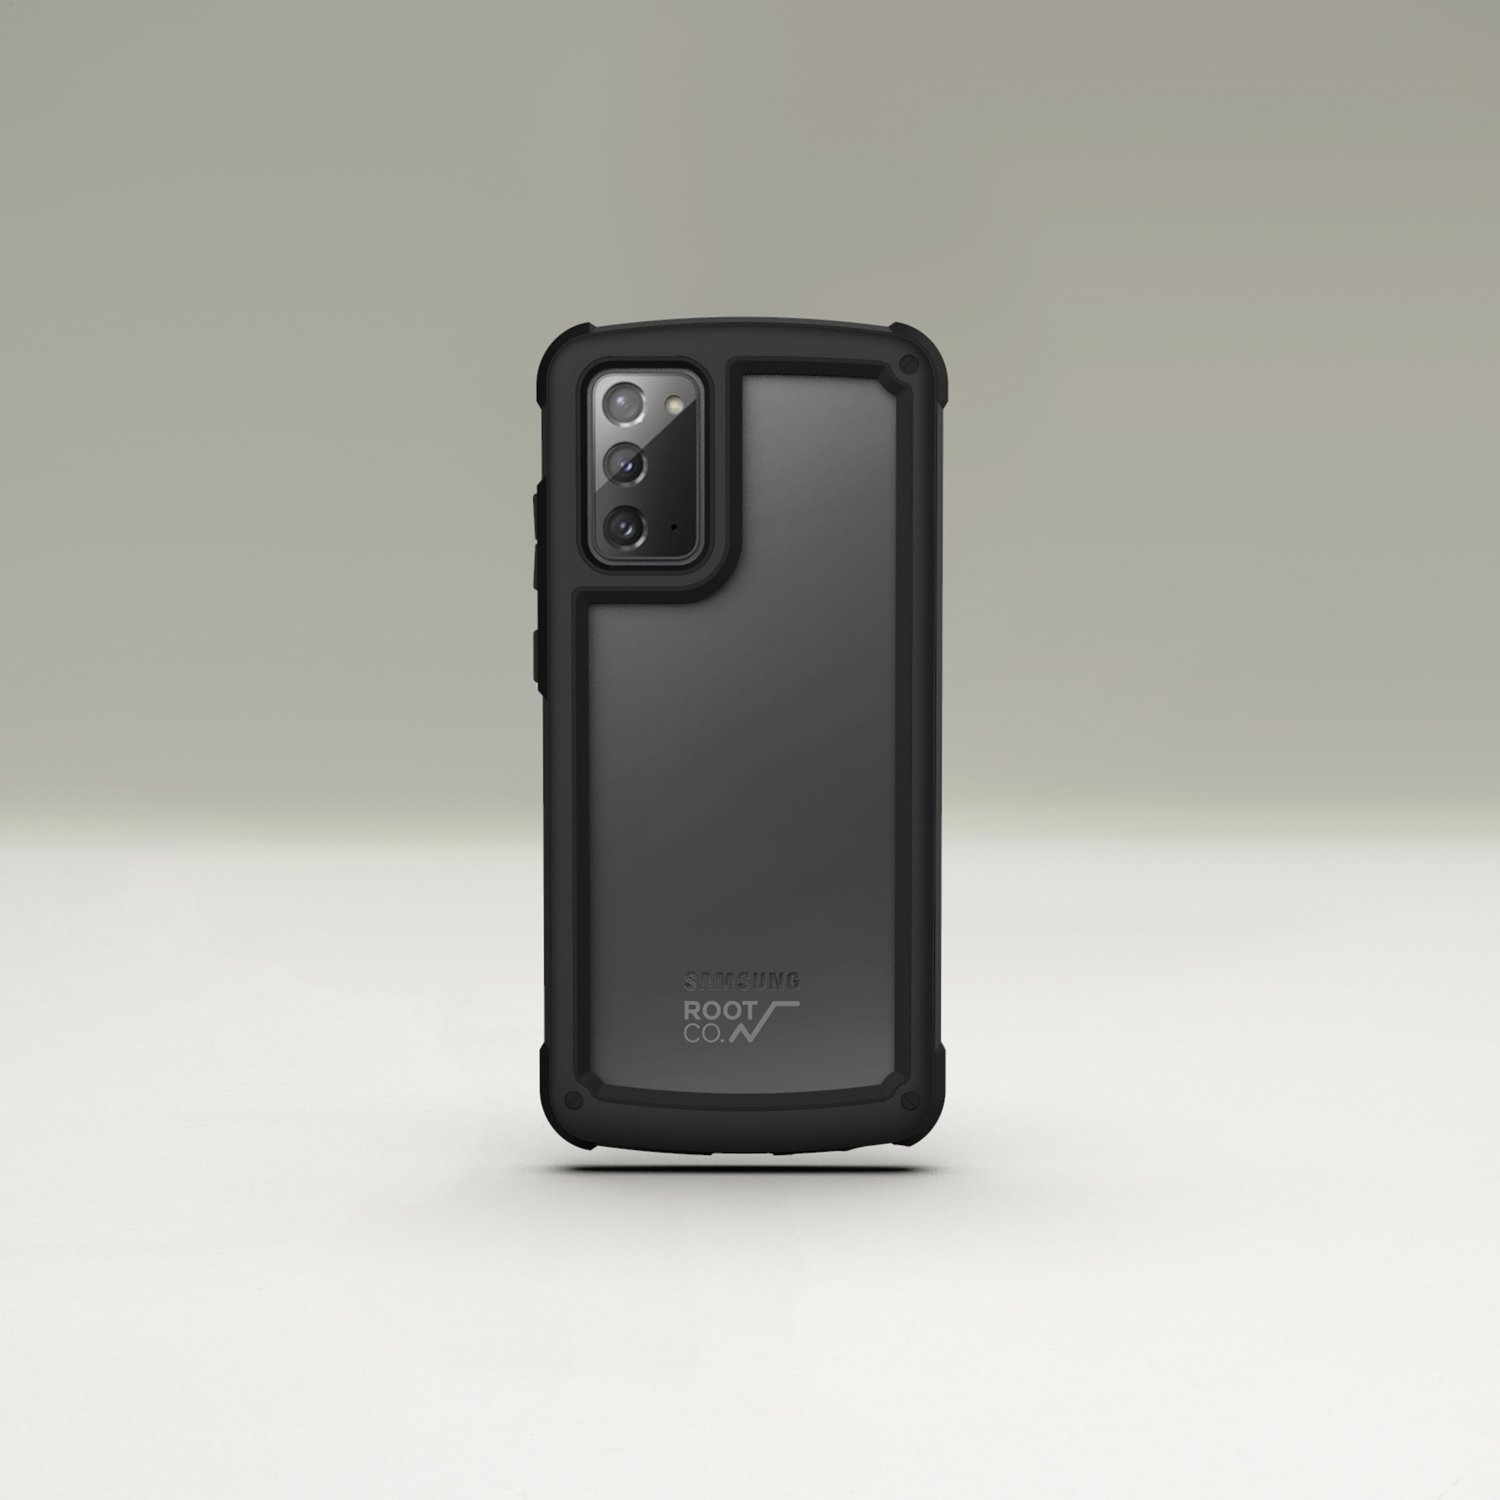 Root Co. Gravity Shock Resist Tough & Basic Case for Samsung Galaxy Note 20, Black Default ROOT CO. 